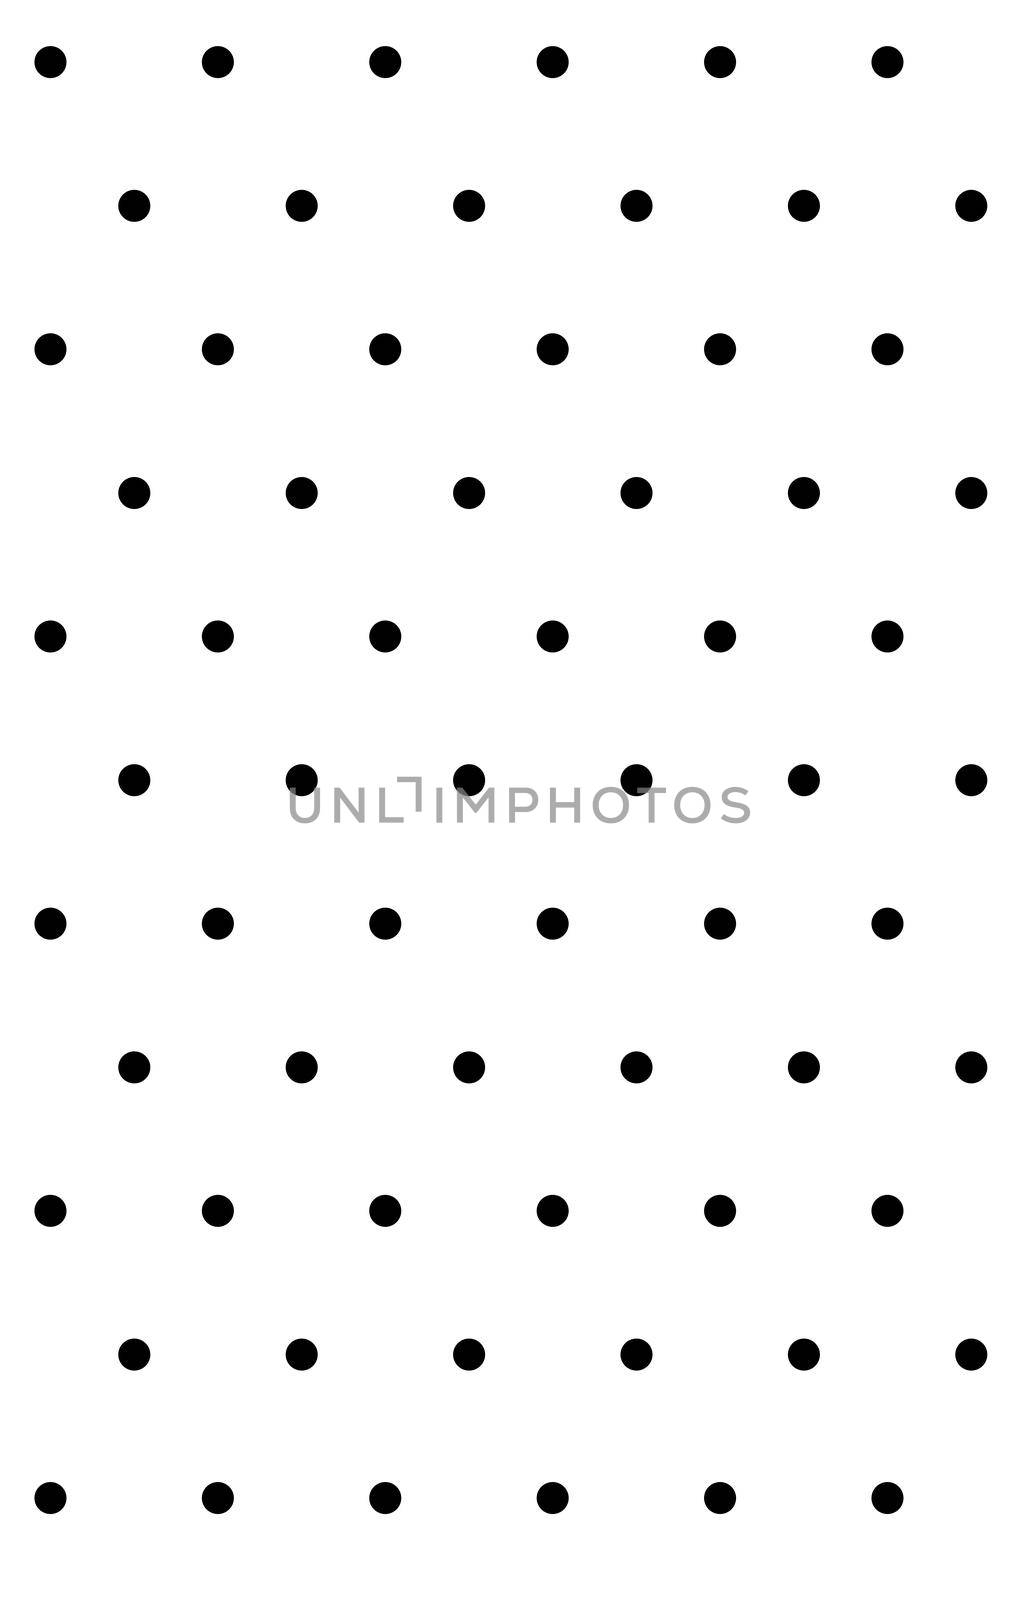 Seamless monochrome pattern with polka dots. Dotted background. Endless decorative linear round texture. Black and white decorative element.